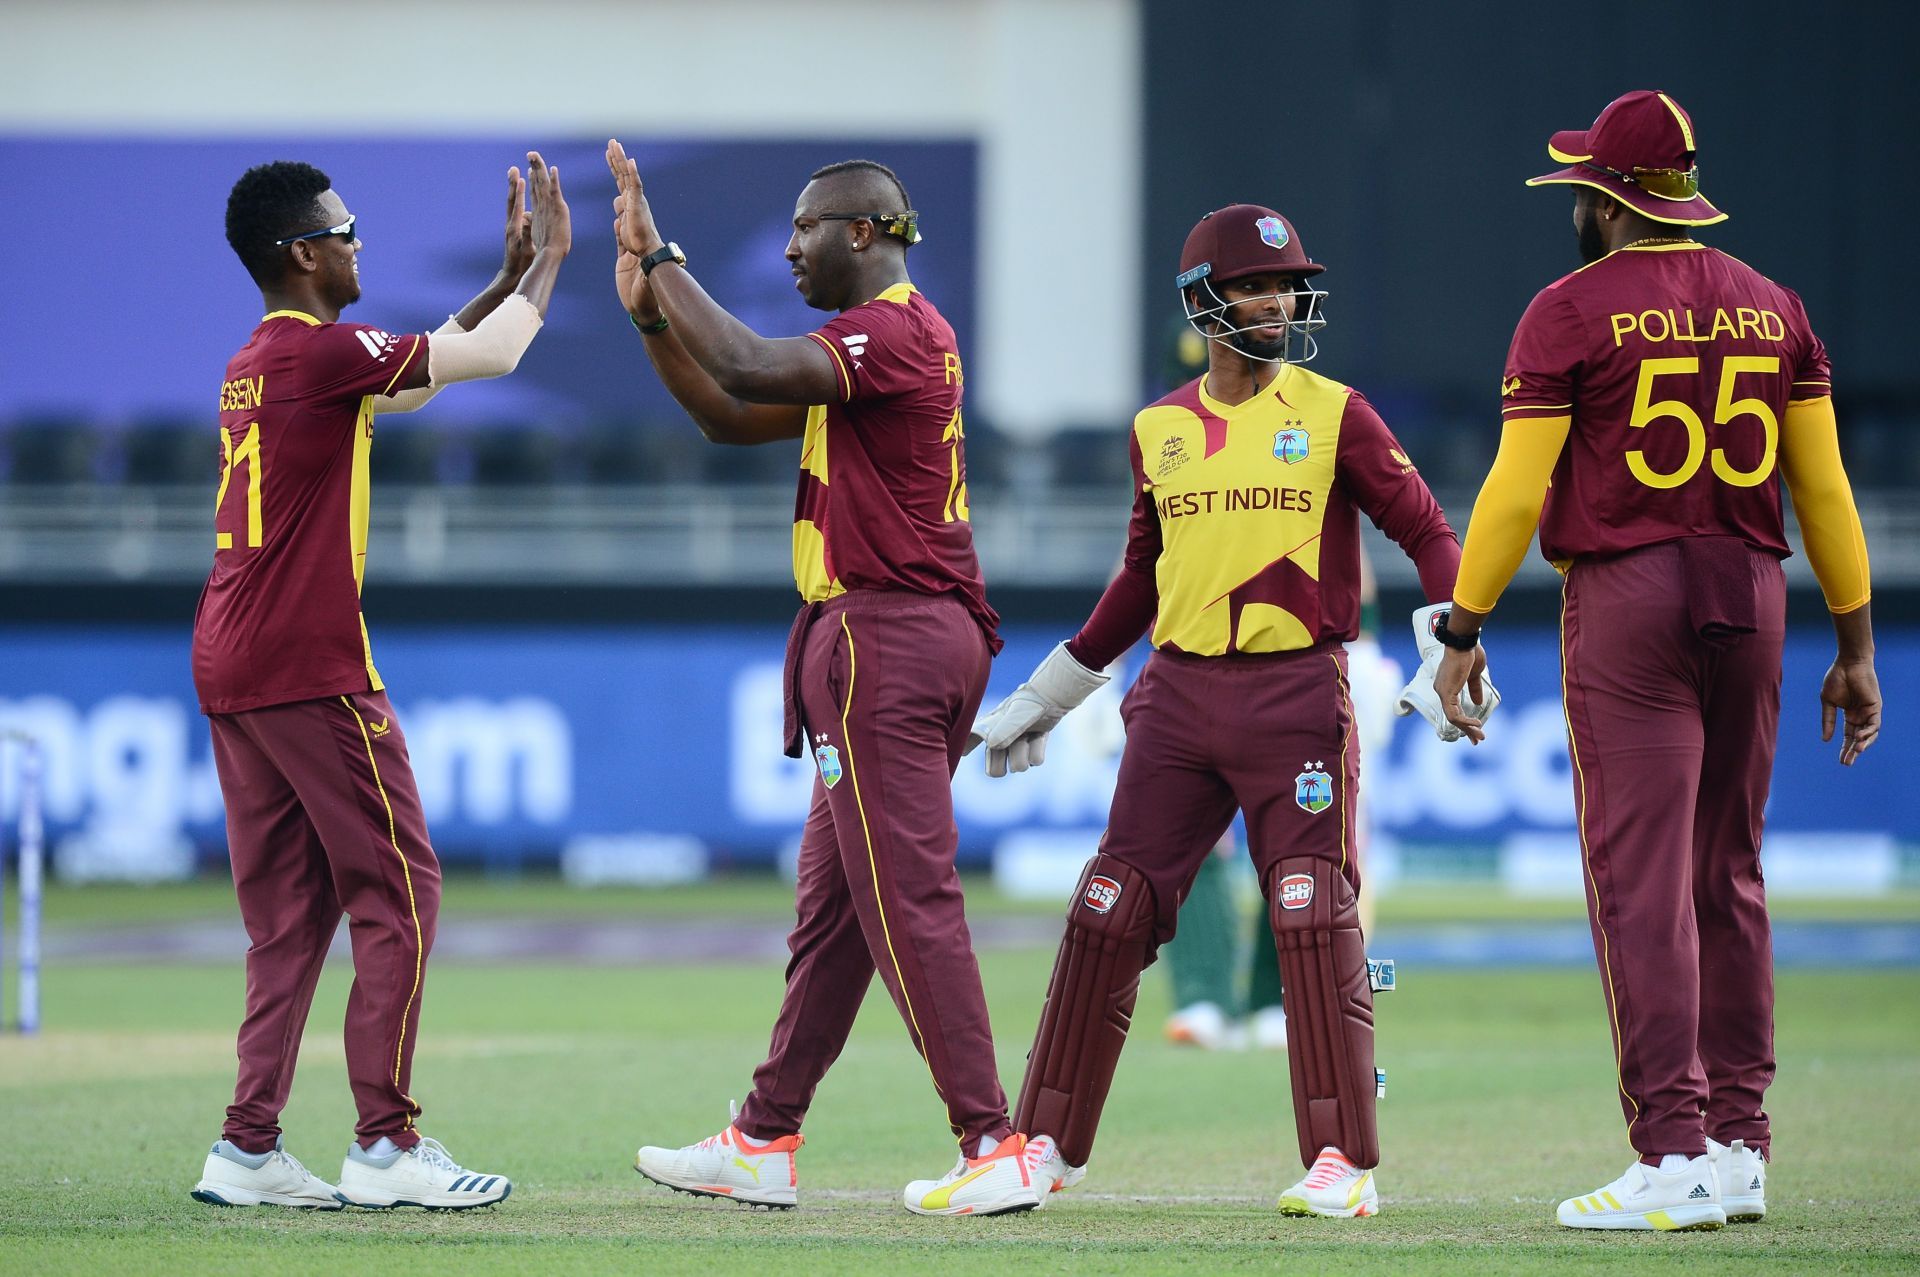 West Indies need a win to keep their title defense alive